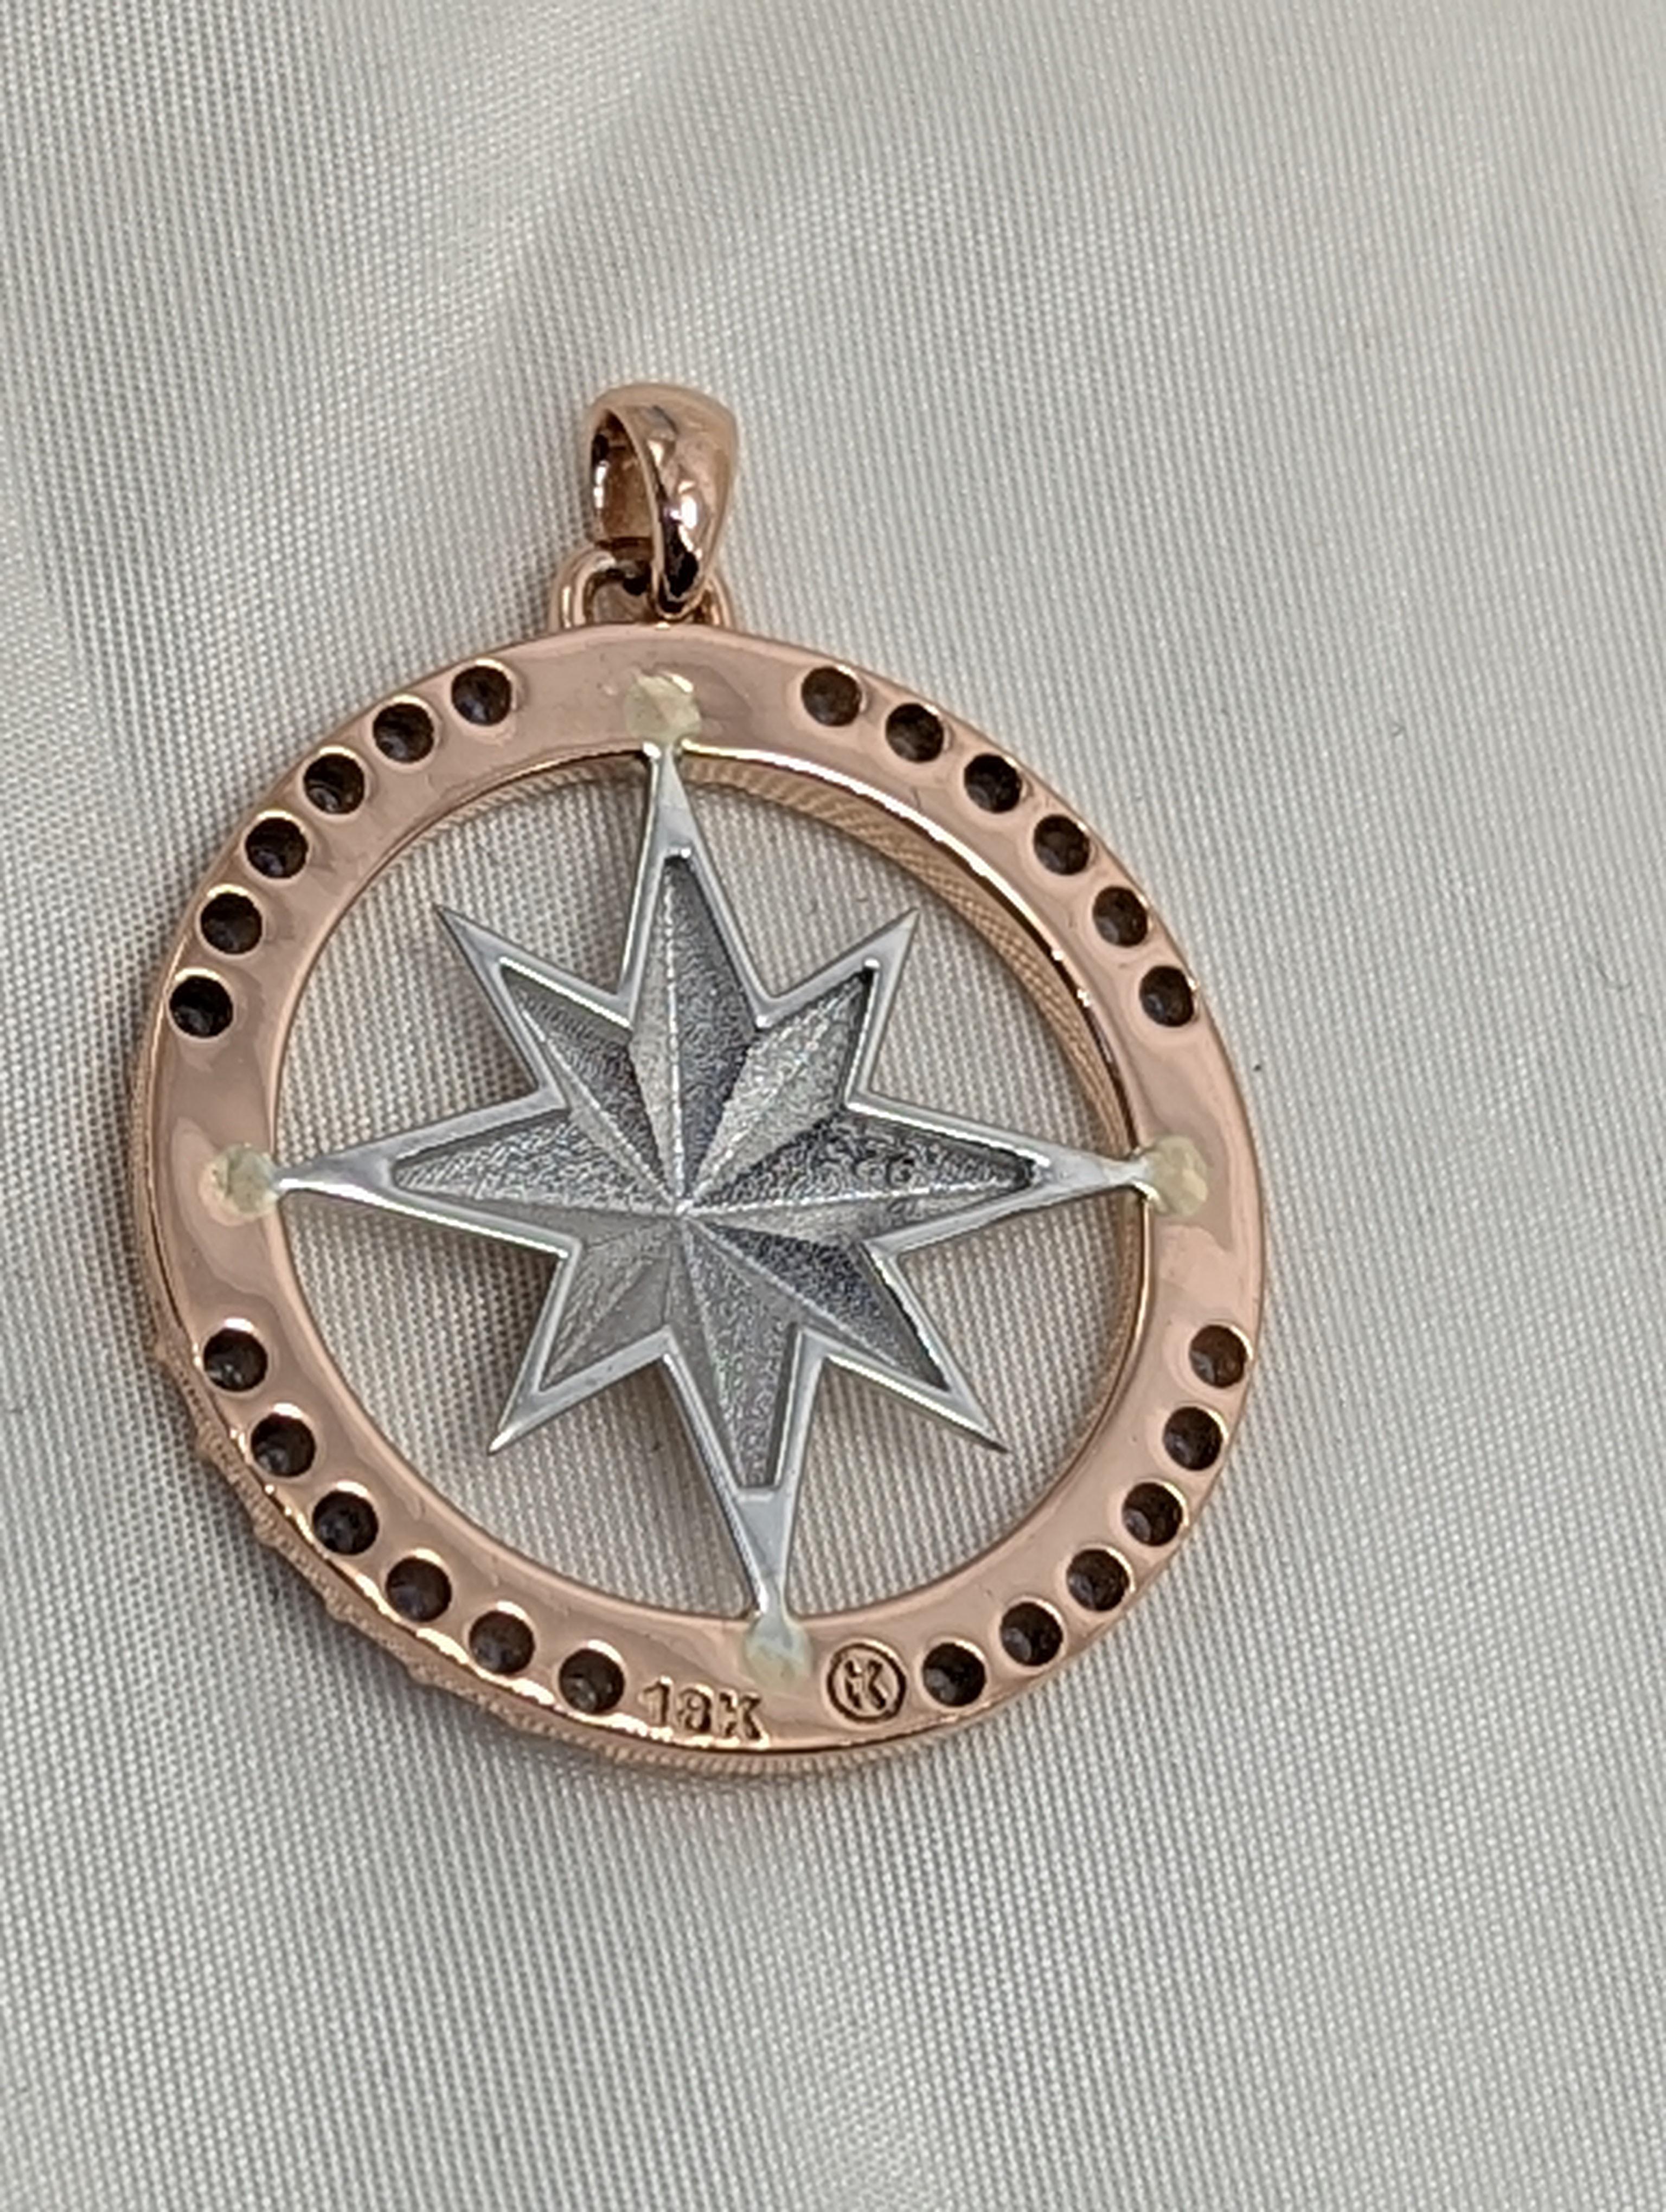 Contemporary 18 Karat Rose Gold and Sterling Sapphires Sailors Compass Pendant For Sale